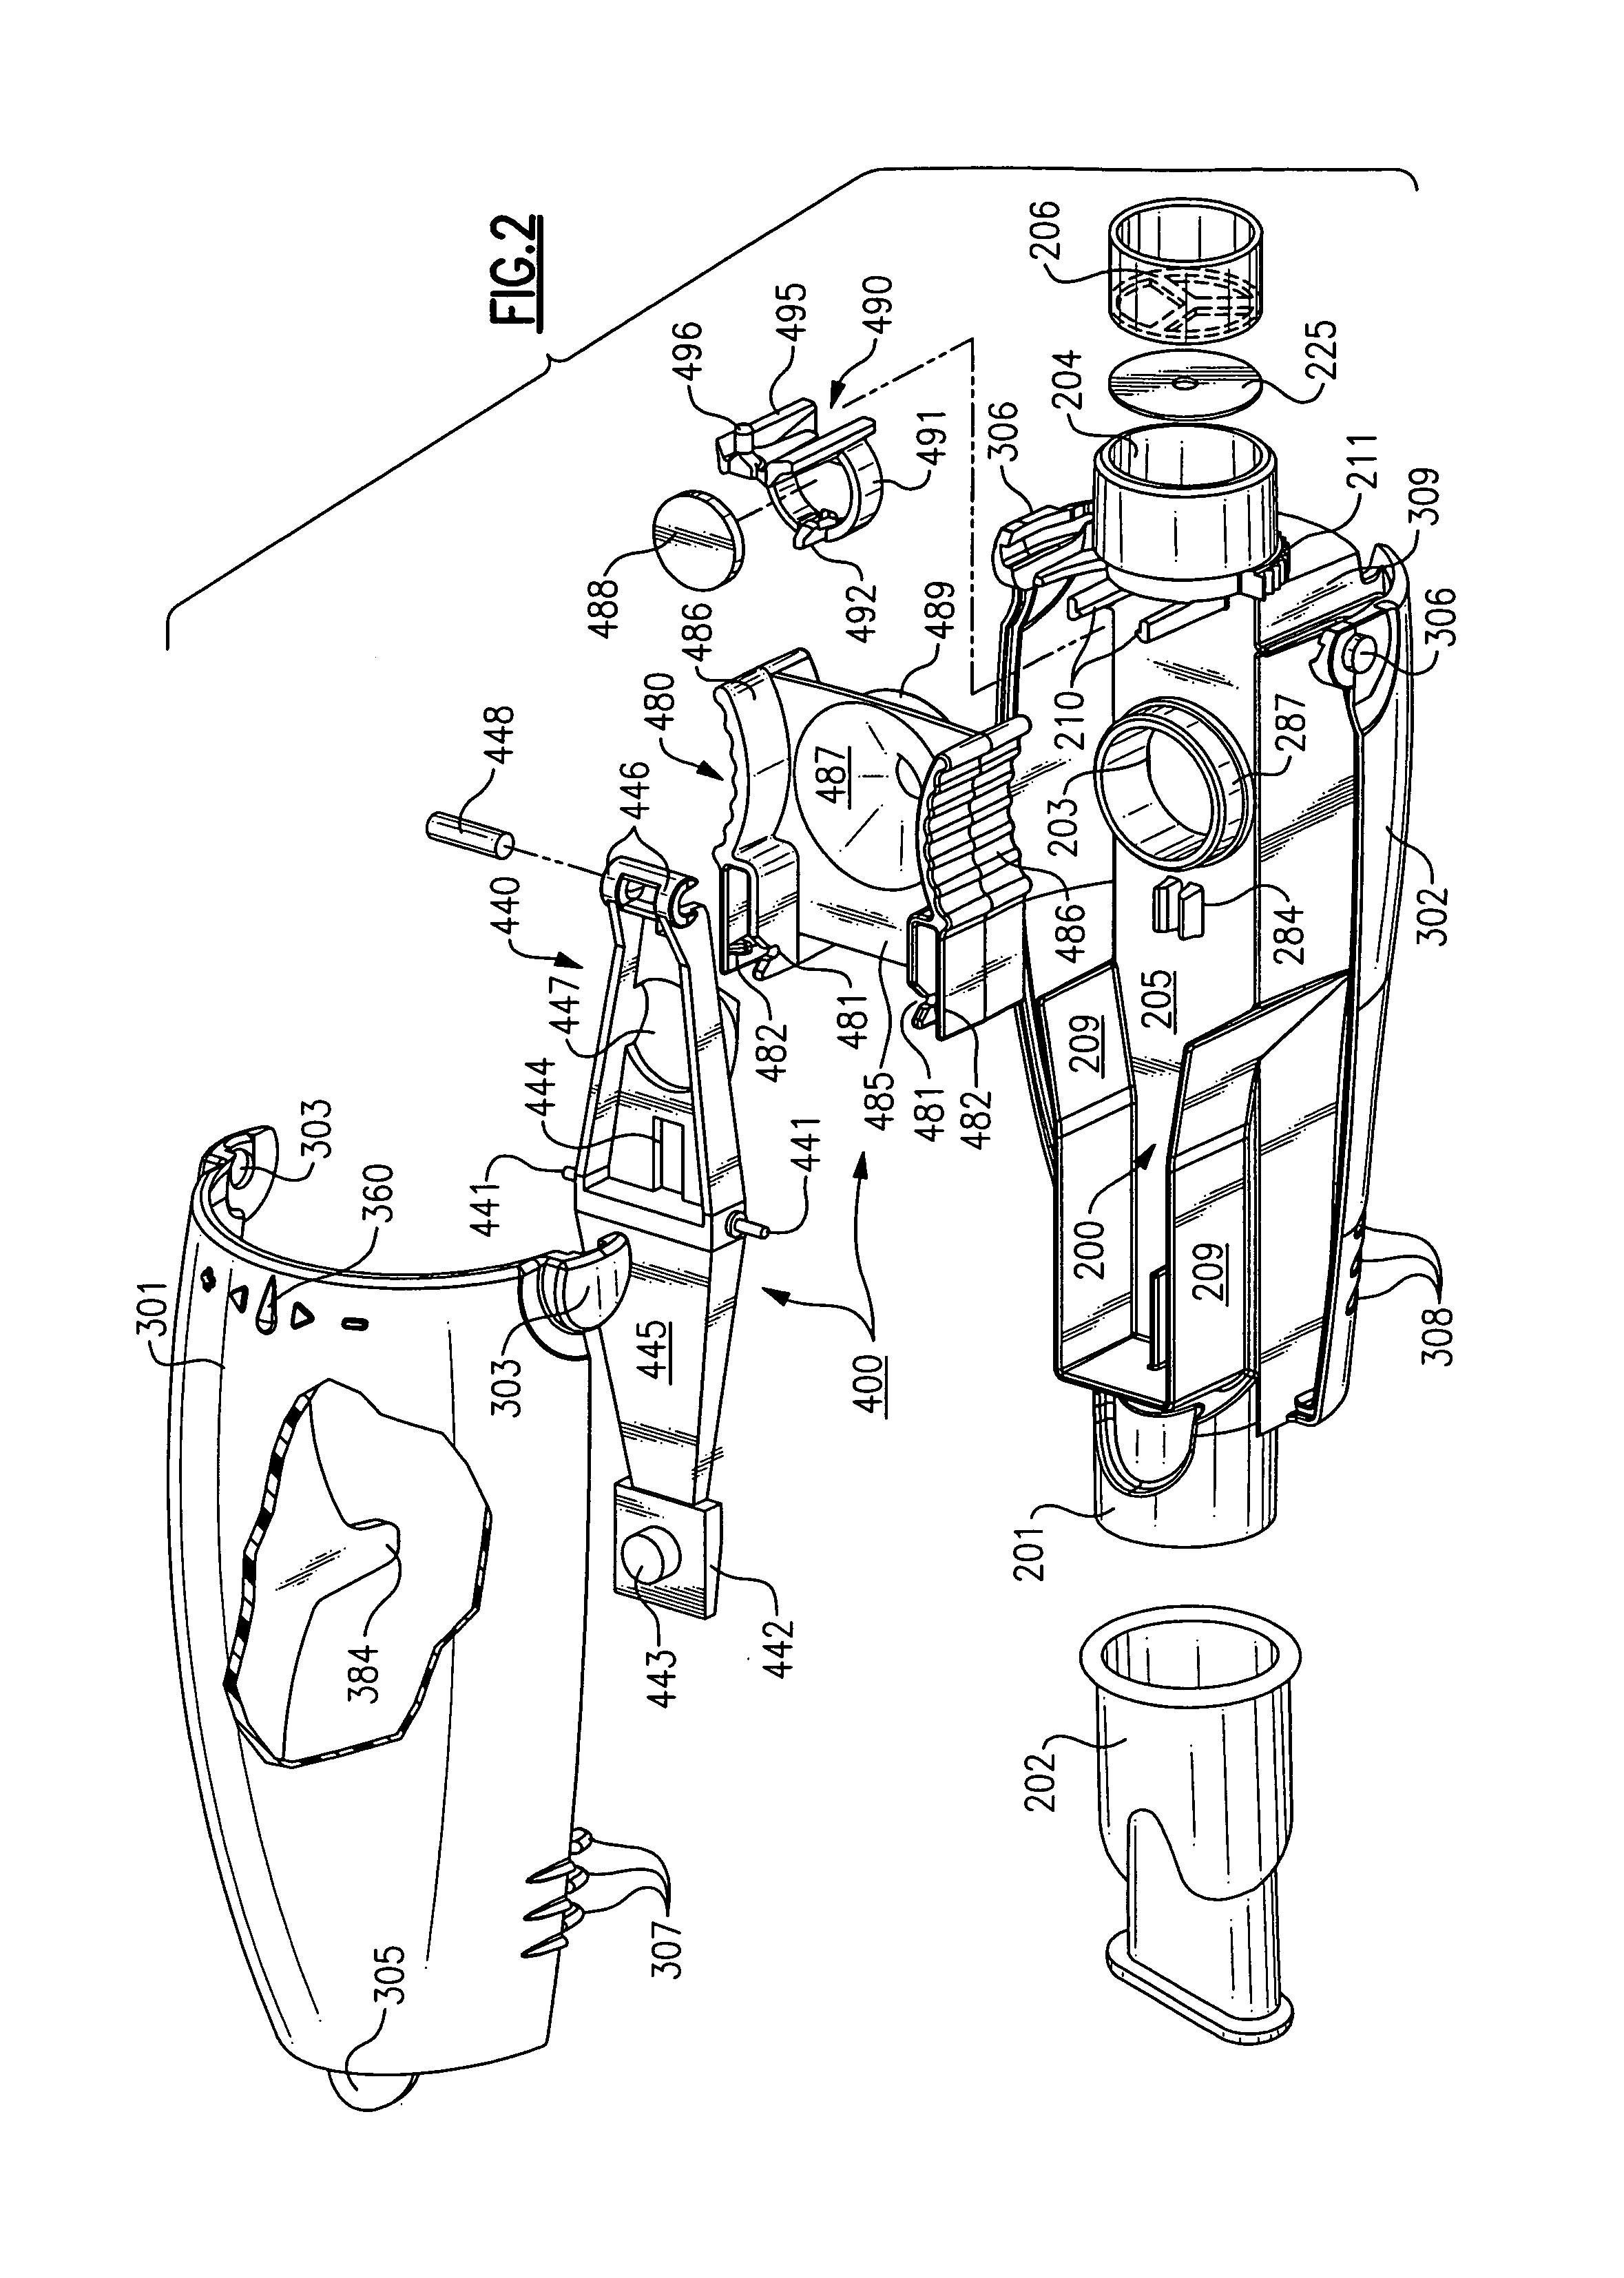 Positive expiratory pressure device with bypass